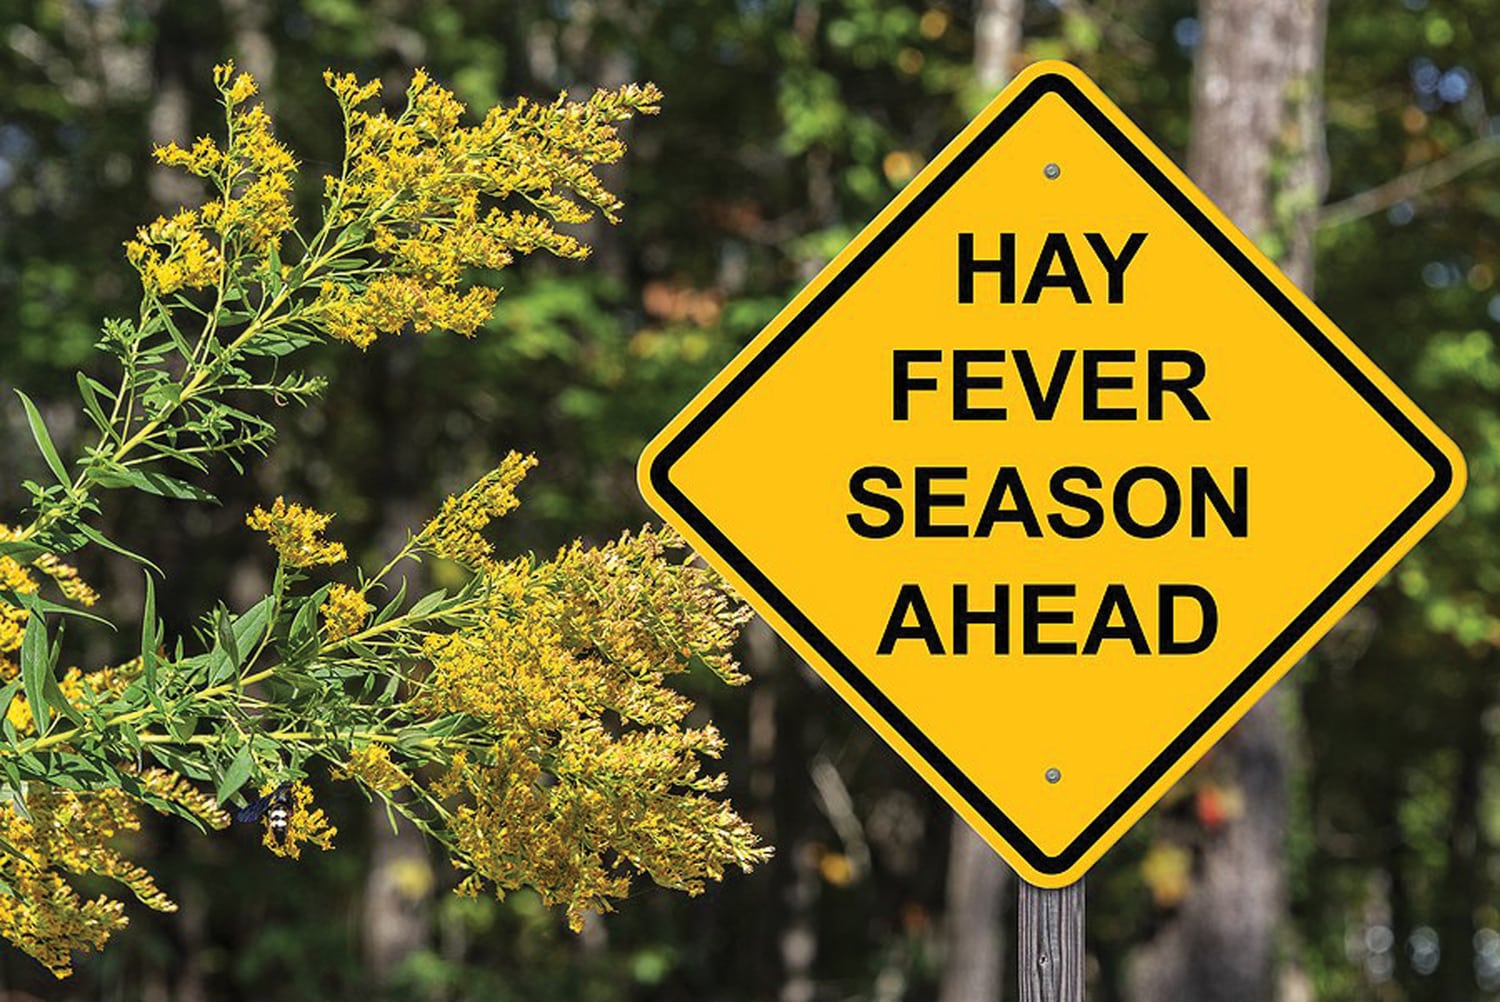 Atchoo! Top tips for hay fever sufferers this Spring and Summer Our Place